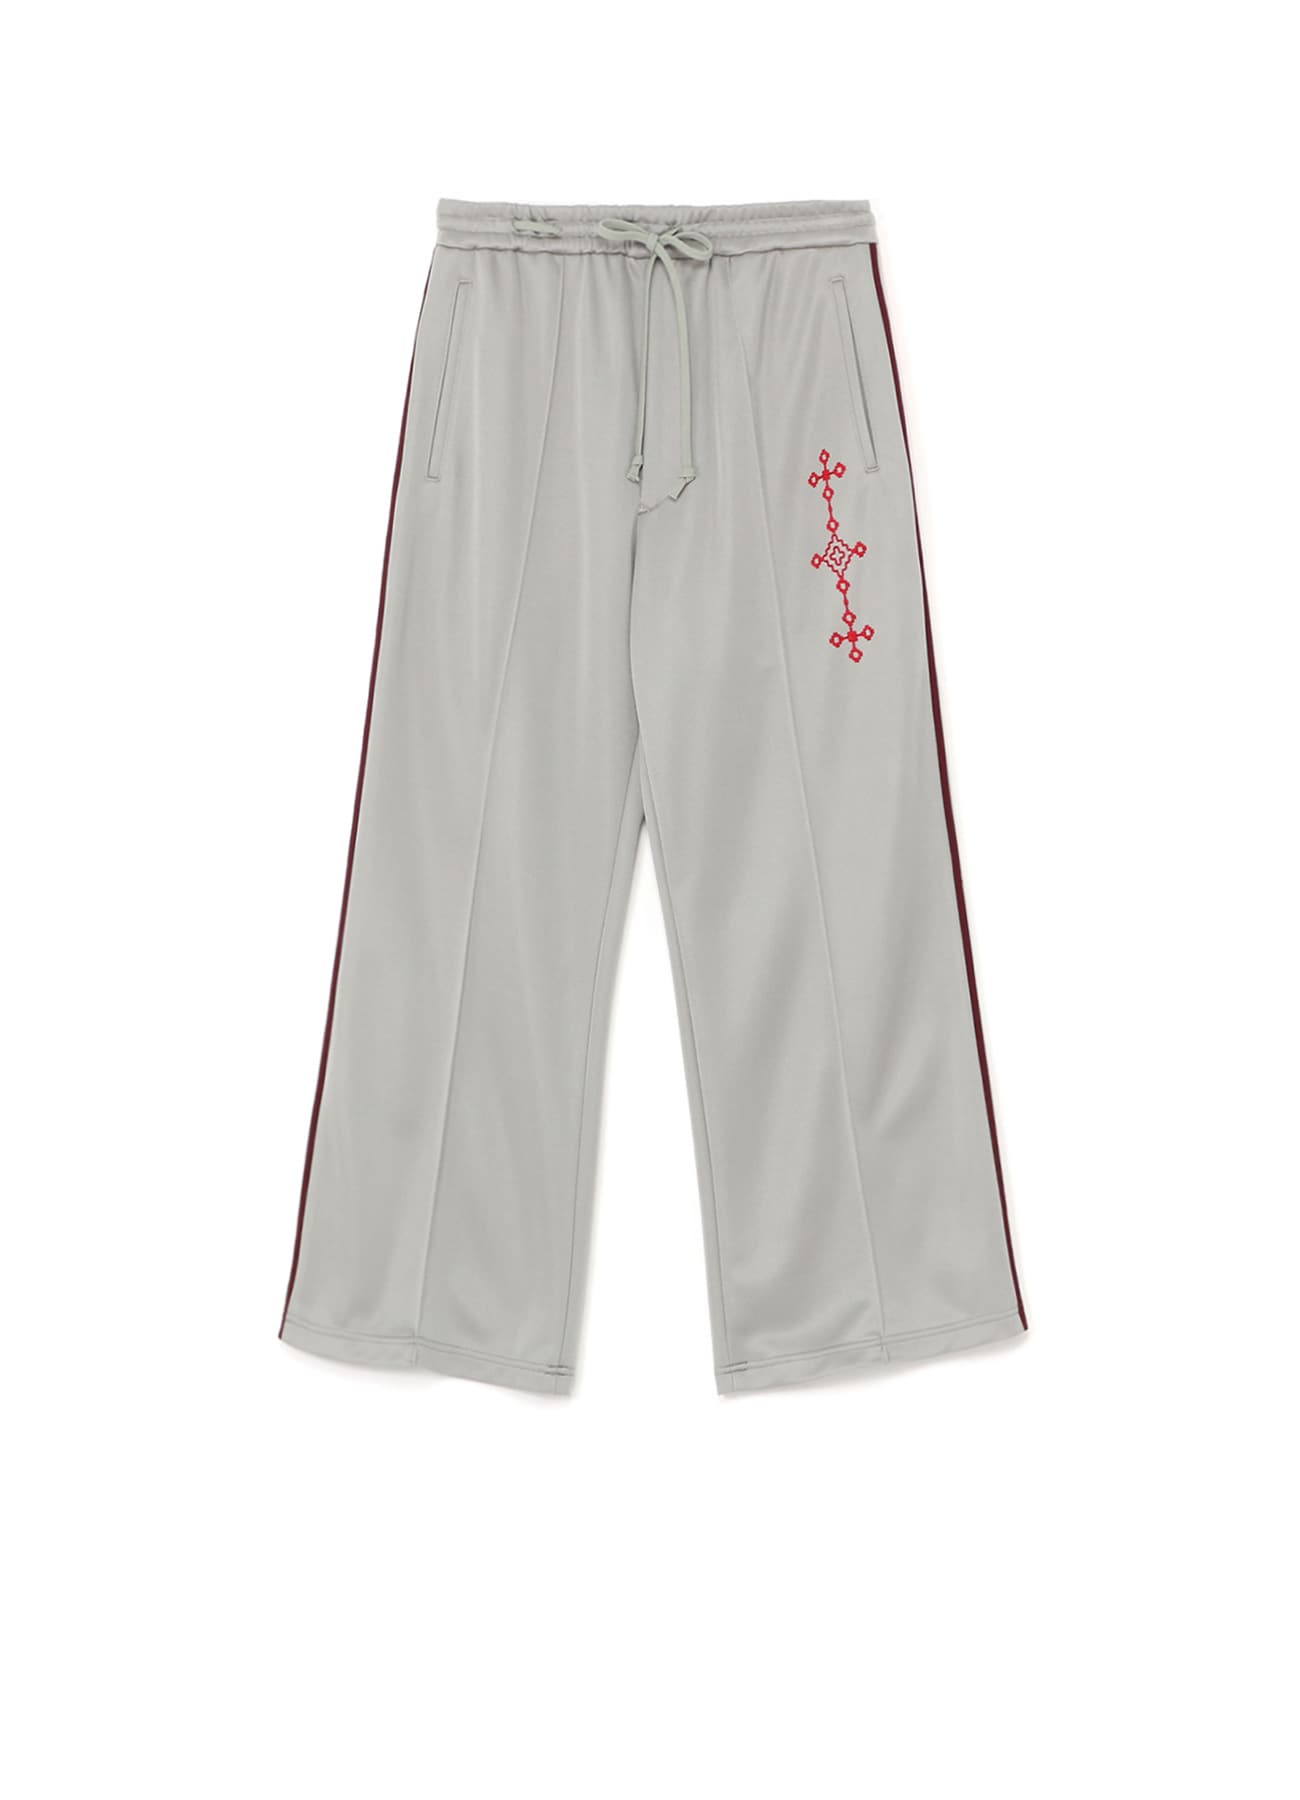 PE/SMOOTH JERSEY GEOMETRIC PATTERN EMBROIDERY SIDE TAPE LINE FLARE PANTS